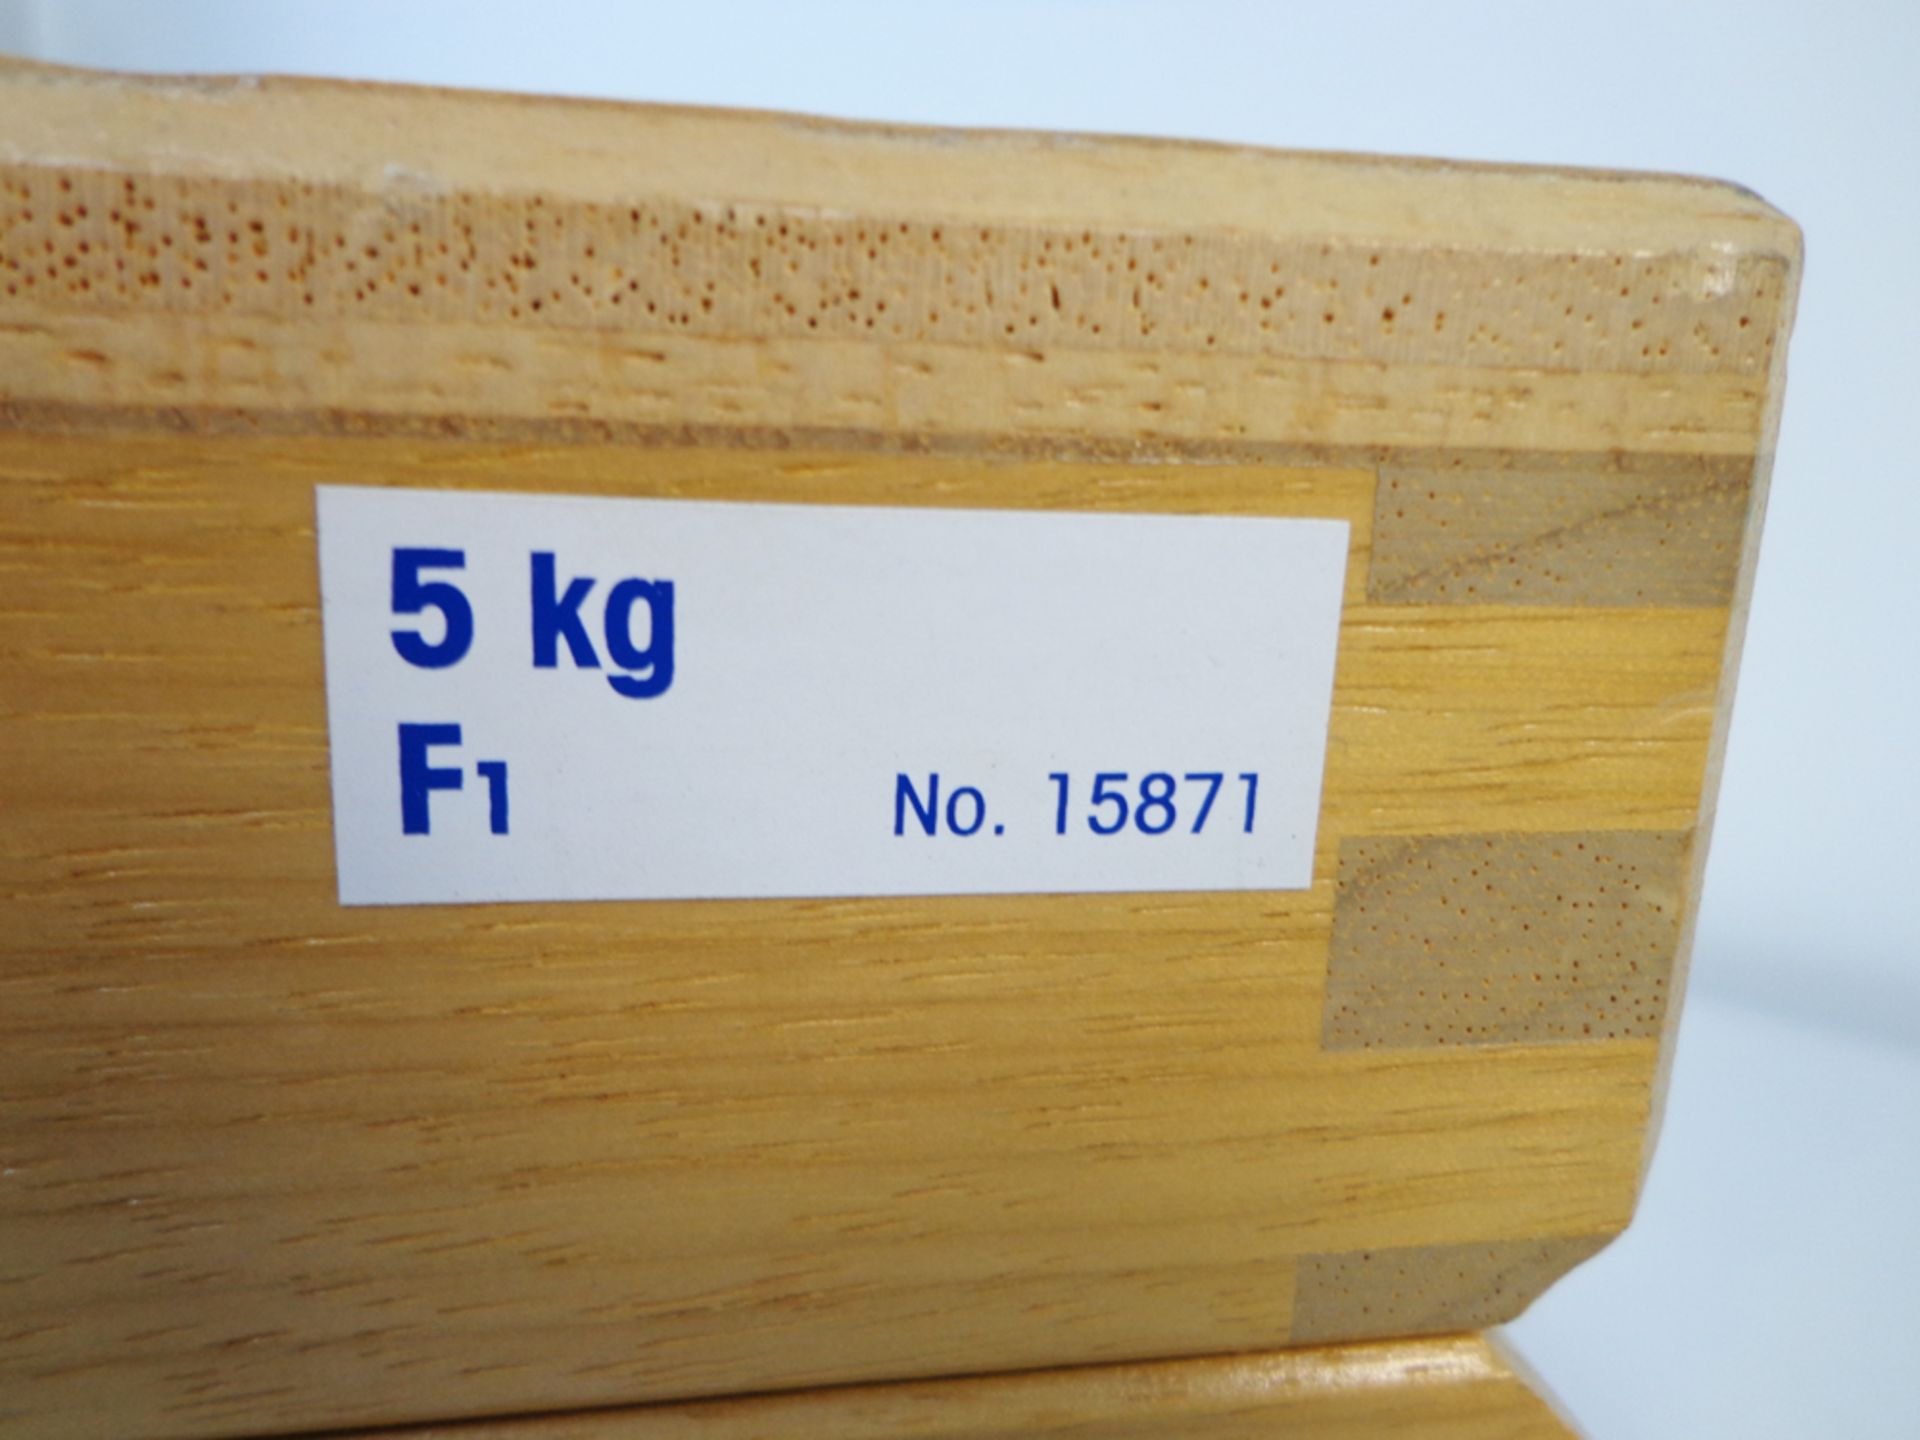 Mettler Toledo Single 5kg F1 Stainless Steel Calibration Weight, in Wooden Box, Ref 15871 - Image 4 of 4